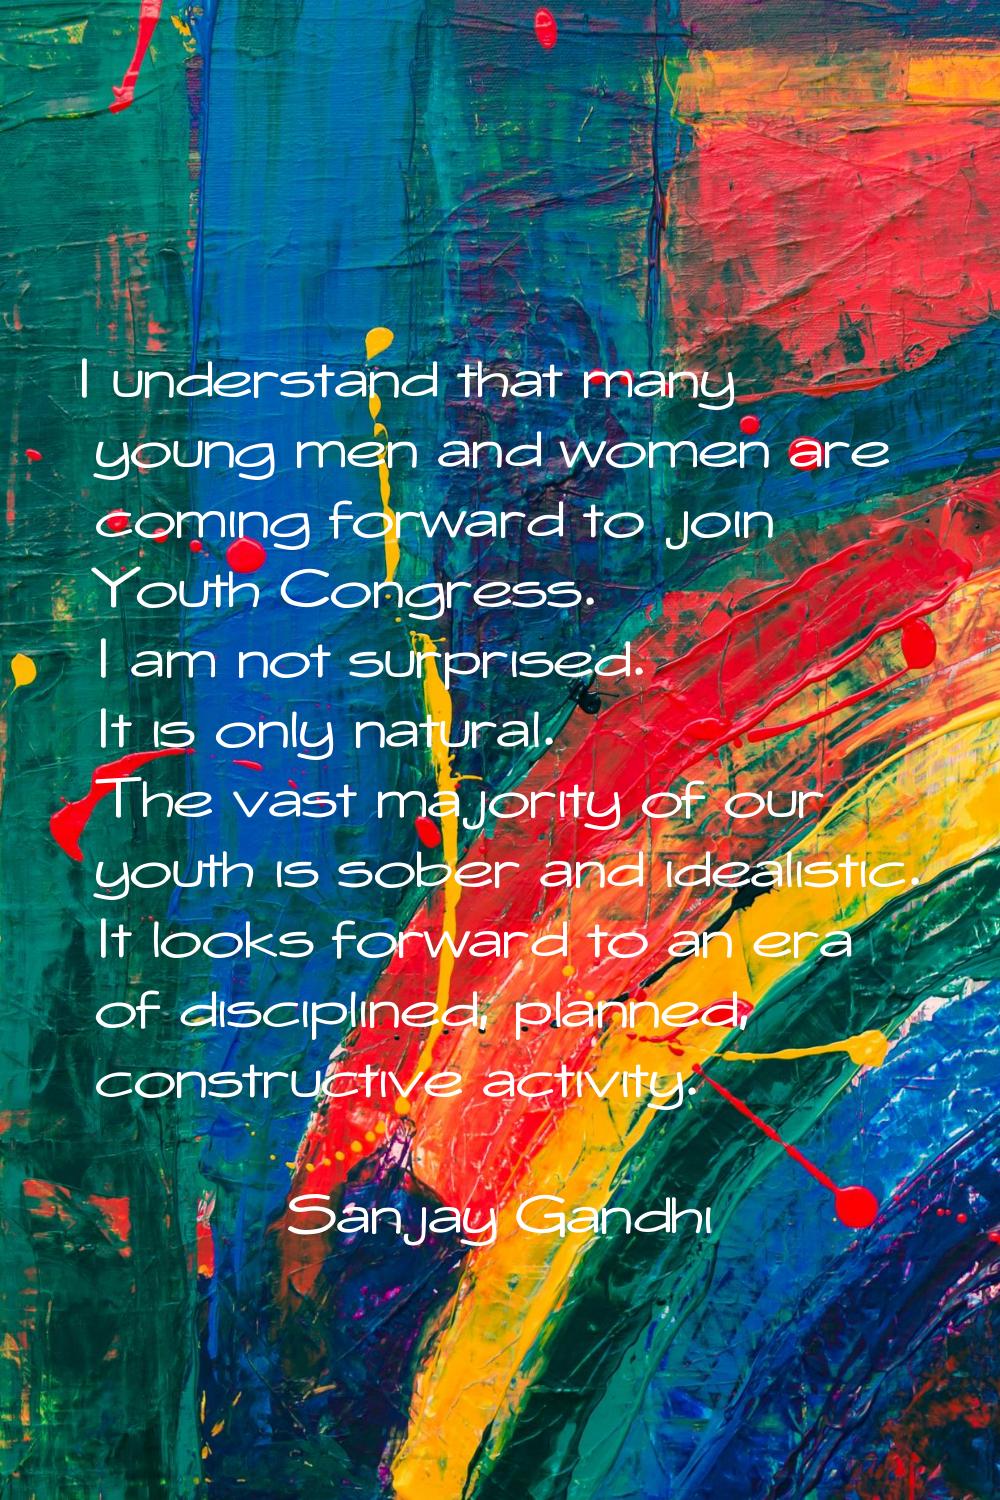 I understand that many young men and women are coming forward to join Youth Congress. I am not surp